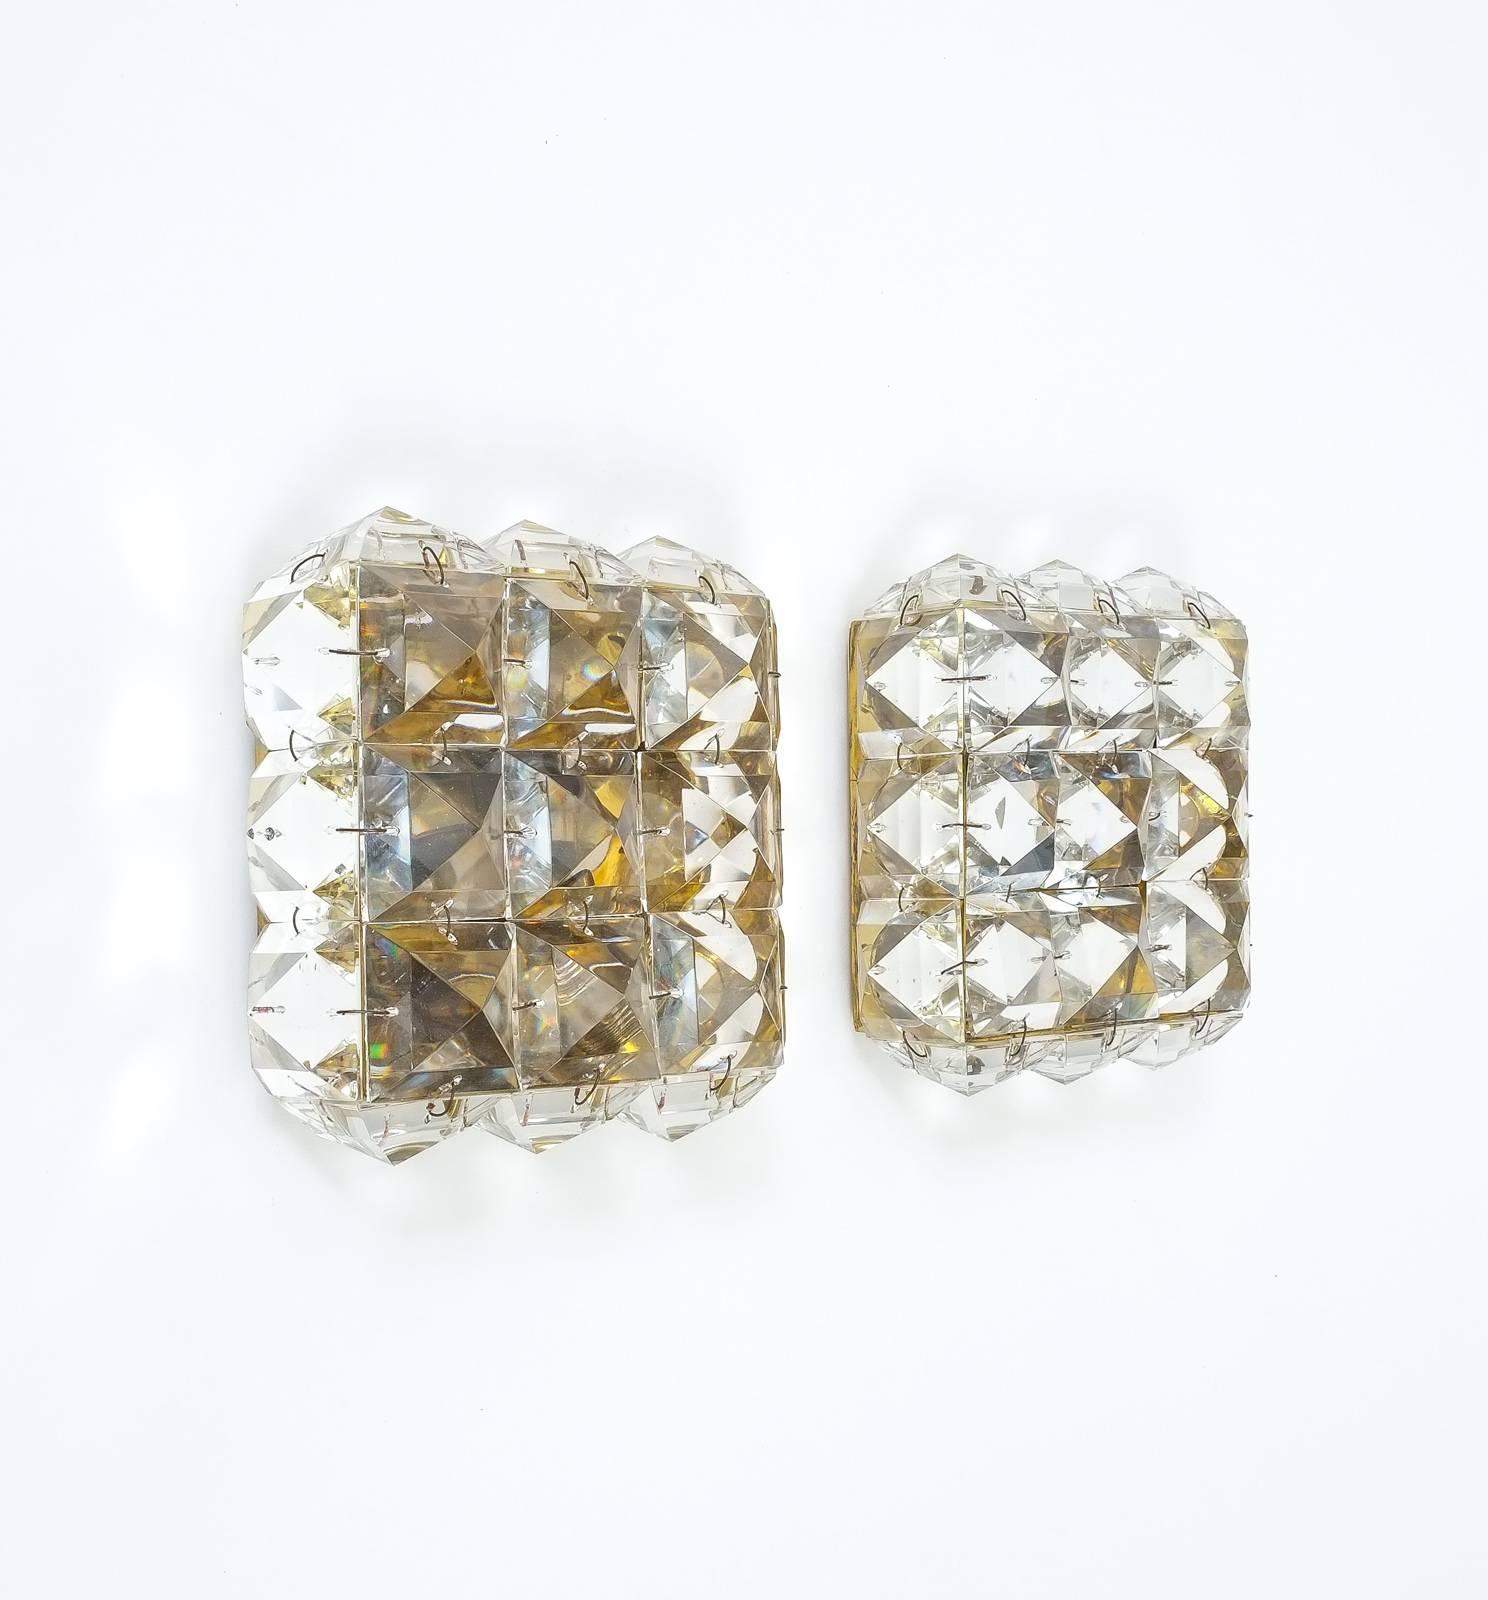 Bakalowits Pair Of Crystal Glass and Brass Sconces, Austria 1950 For Sale 3